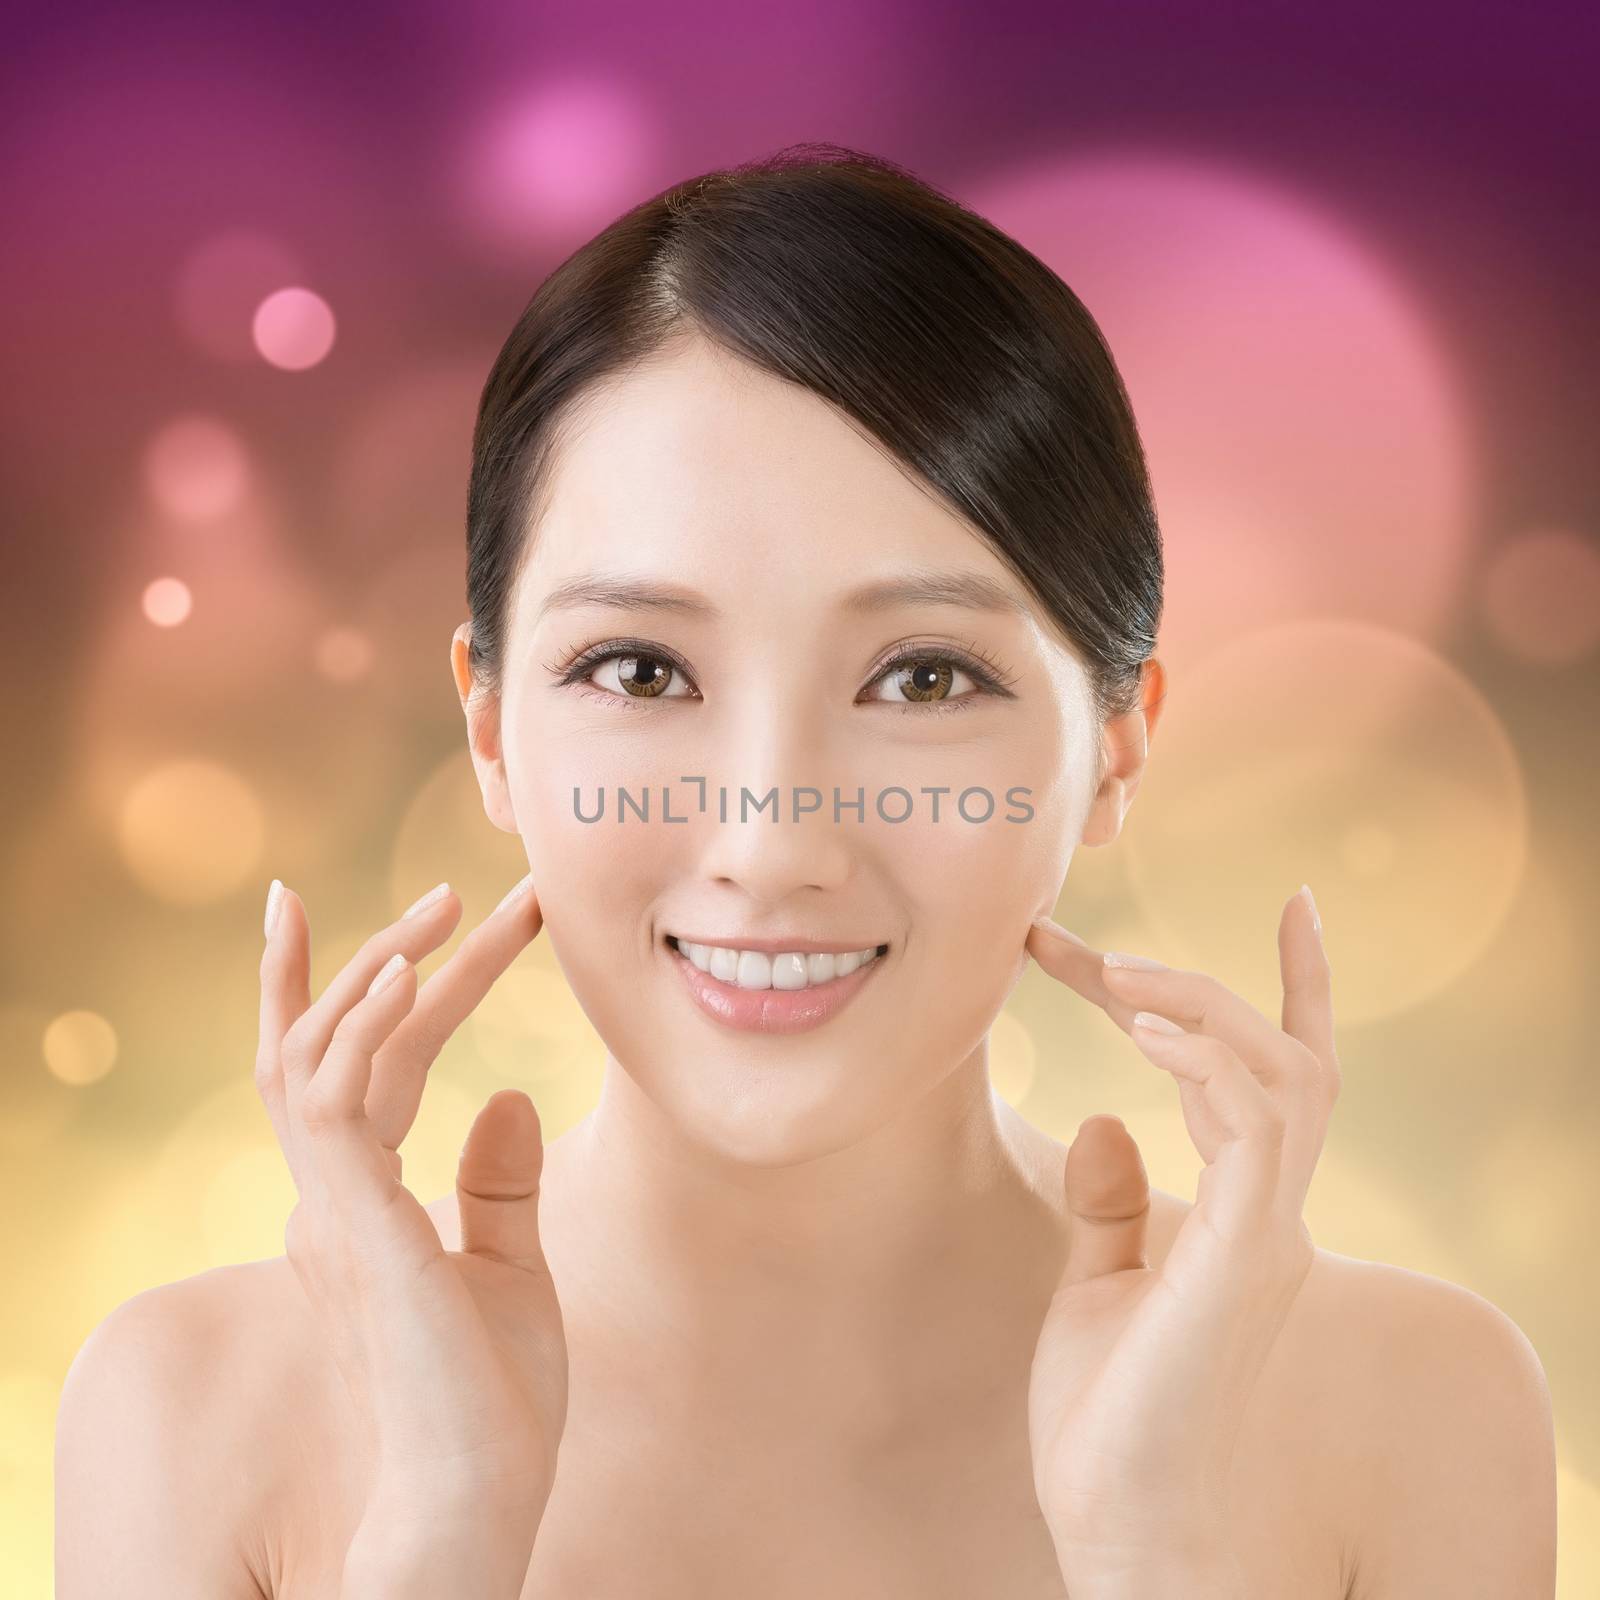 Asian beauty face closeup portrait with clean and fresh elegant lady.